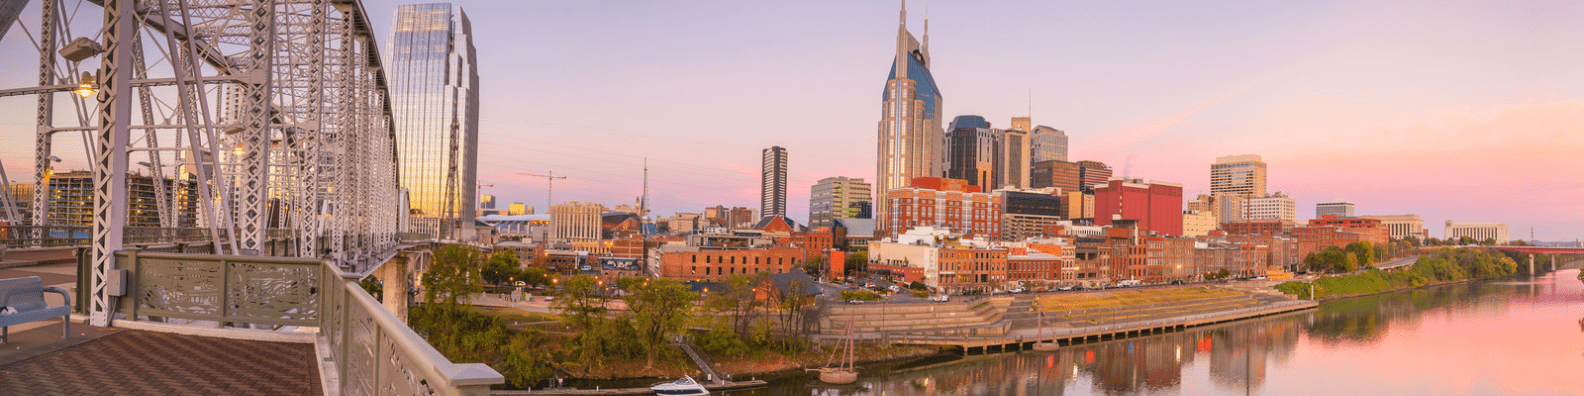 Best things to do in Nashville Tennessee sightseeing attractions Nashville tours min